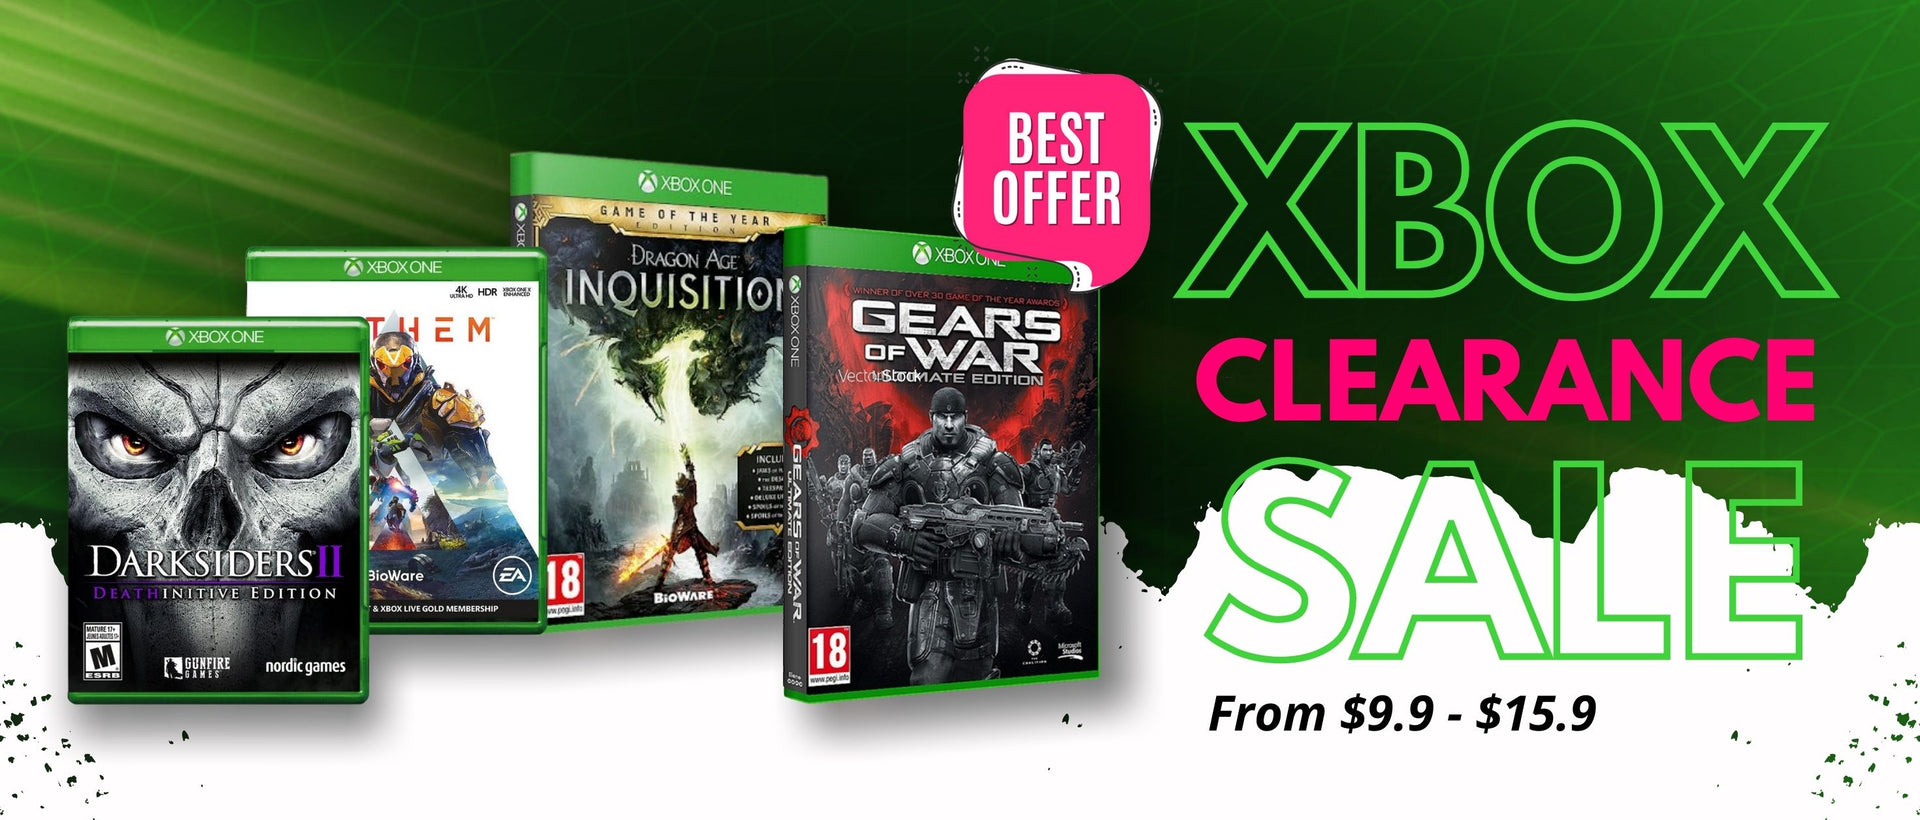 Games Crazy Deals - Bringing you the Best Games at Crazy Prices.